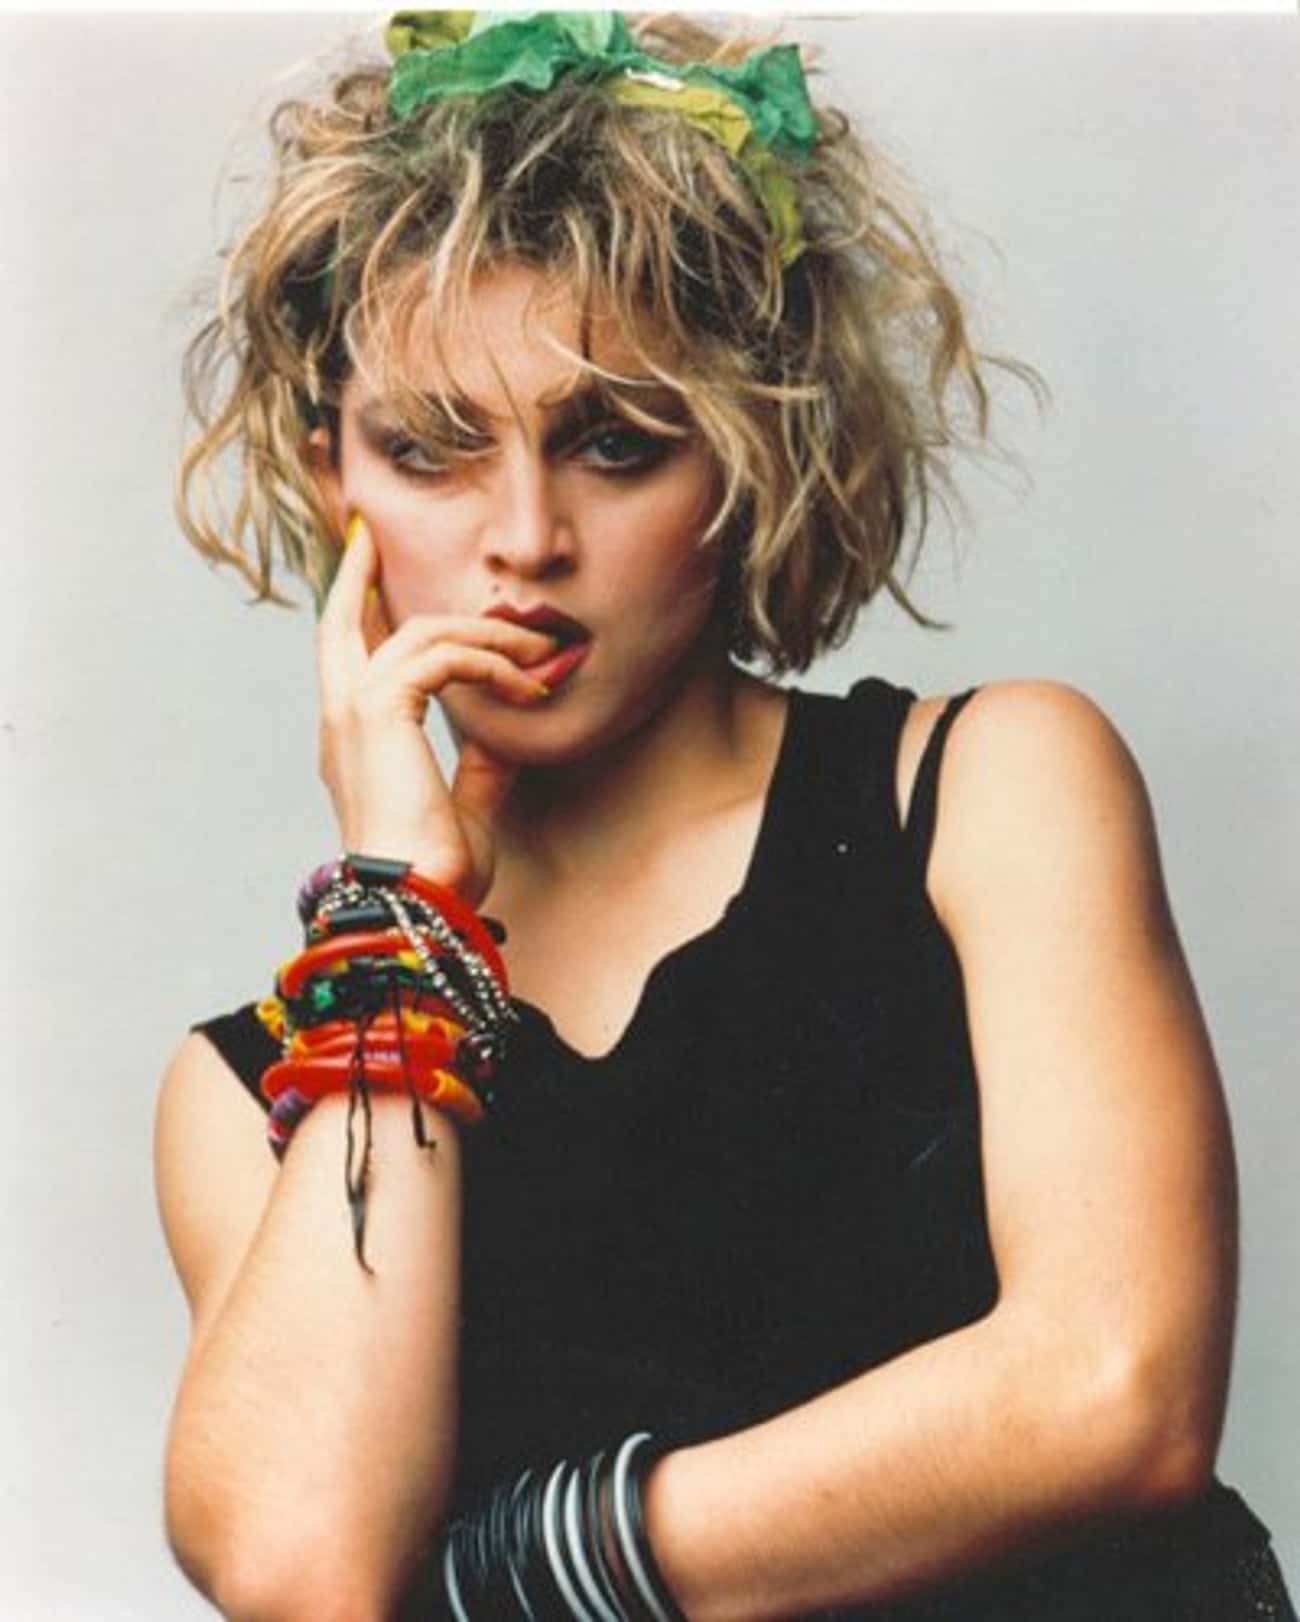 A Younger Madonna As The Bracelet Queen